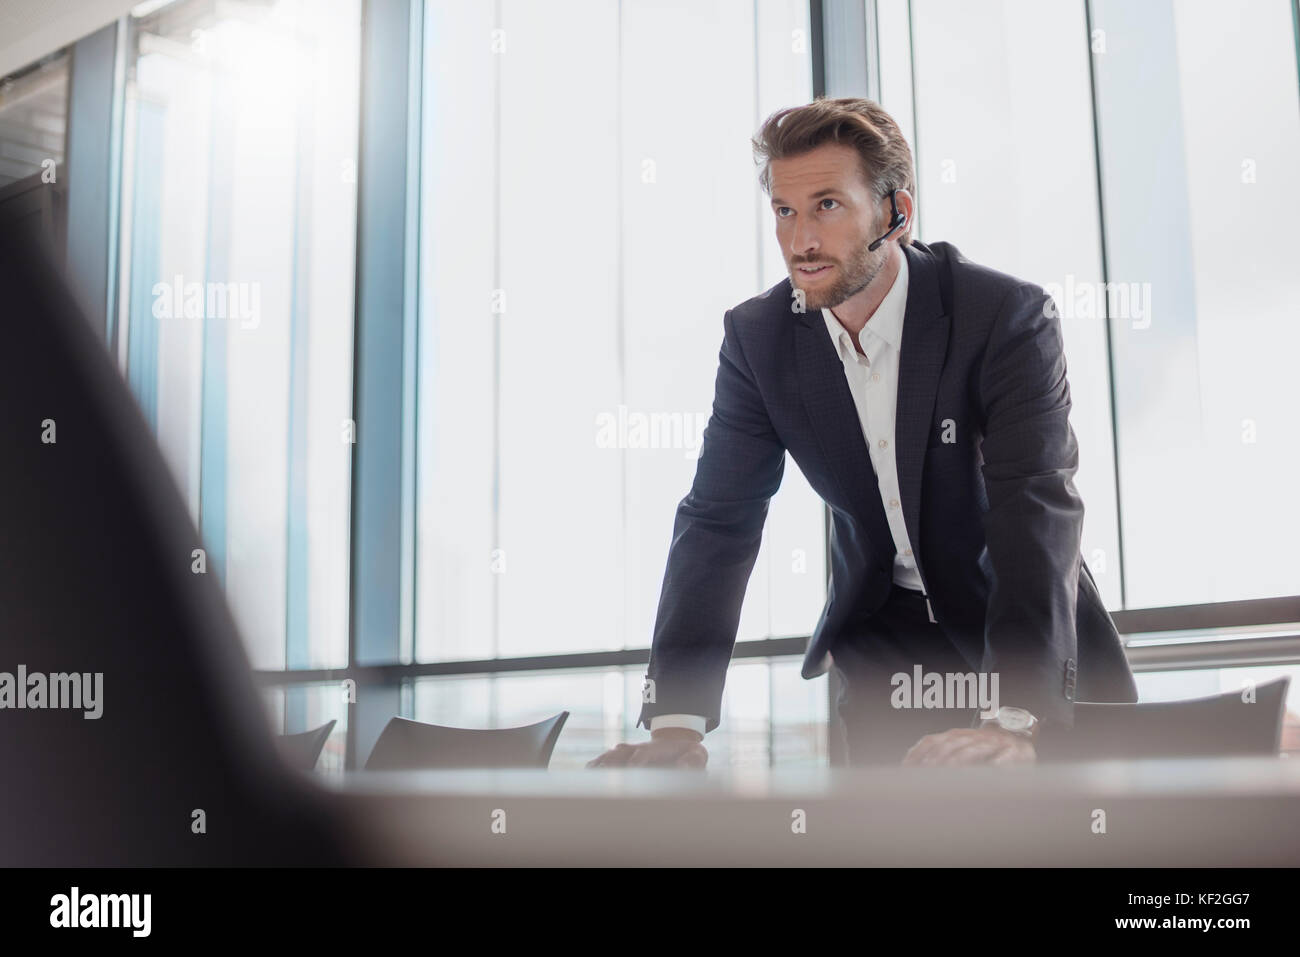 Portrait of businessman with bluetooth headset standing in conference room Stock Photo